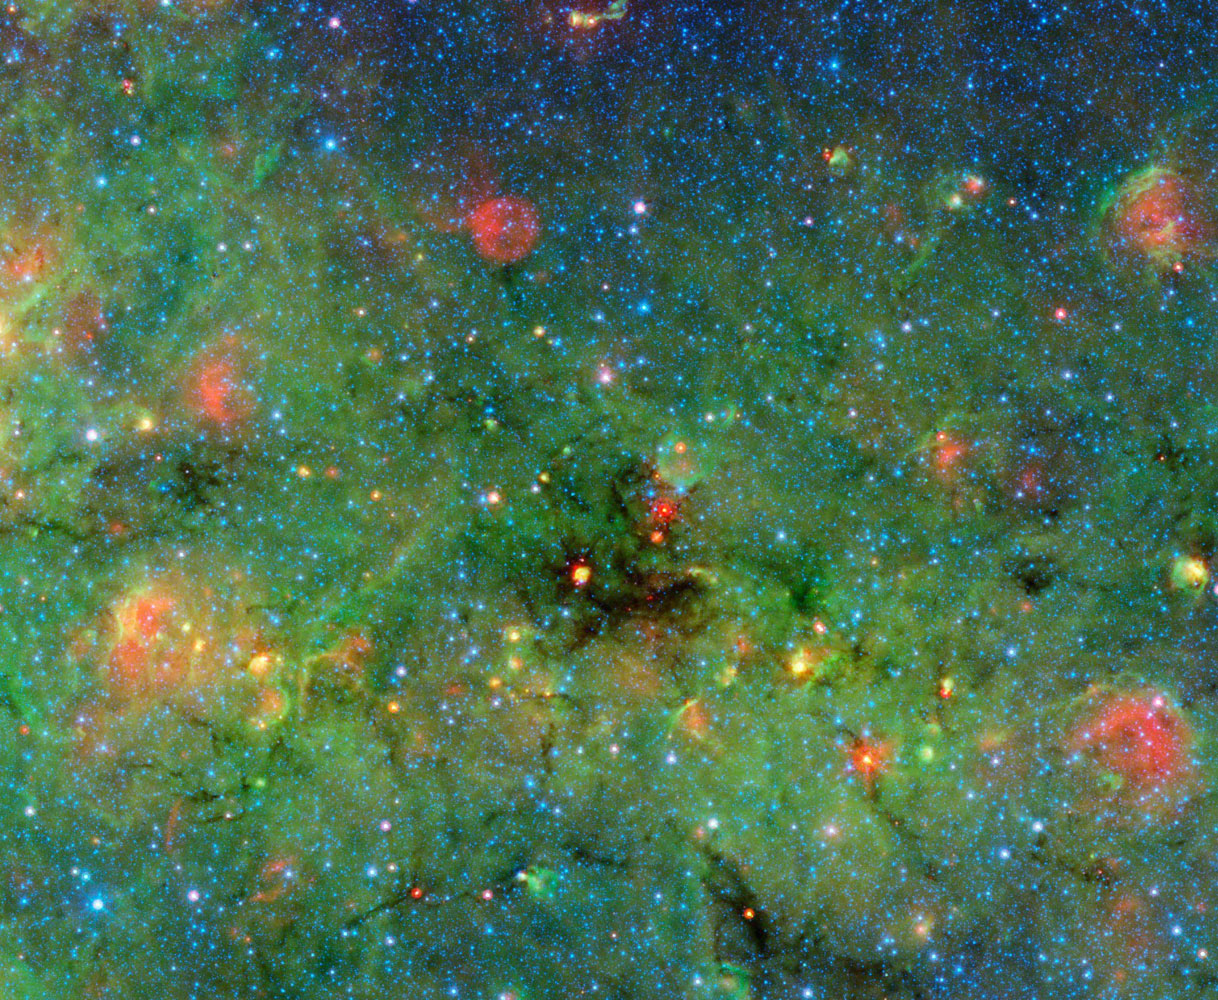 A huge cosmic cloud of gas and dust which will likely evolve into one of the most massive young clusters of stars in our galaxy is shown in an image obtained on May 22, 2014. The densest clumps will blossom into the cluster's biggest, most powerful stars, called O-type stars, the formation of which have long puzzled scientists.